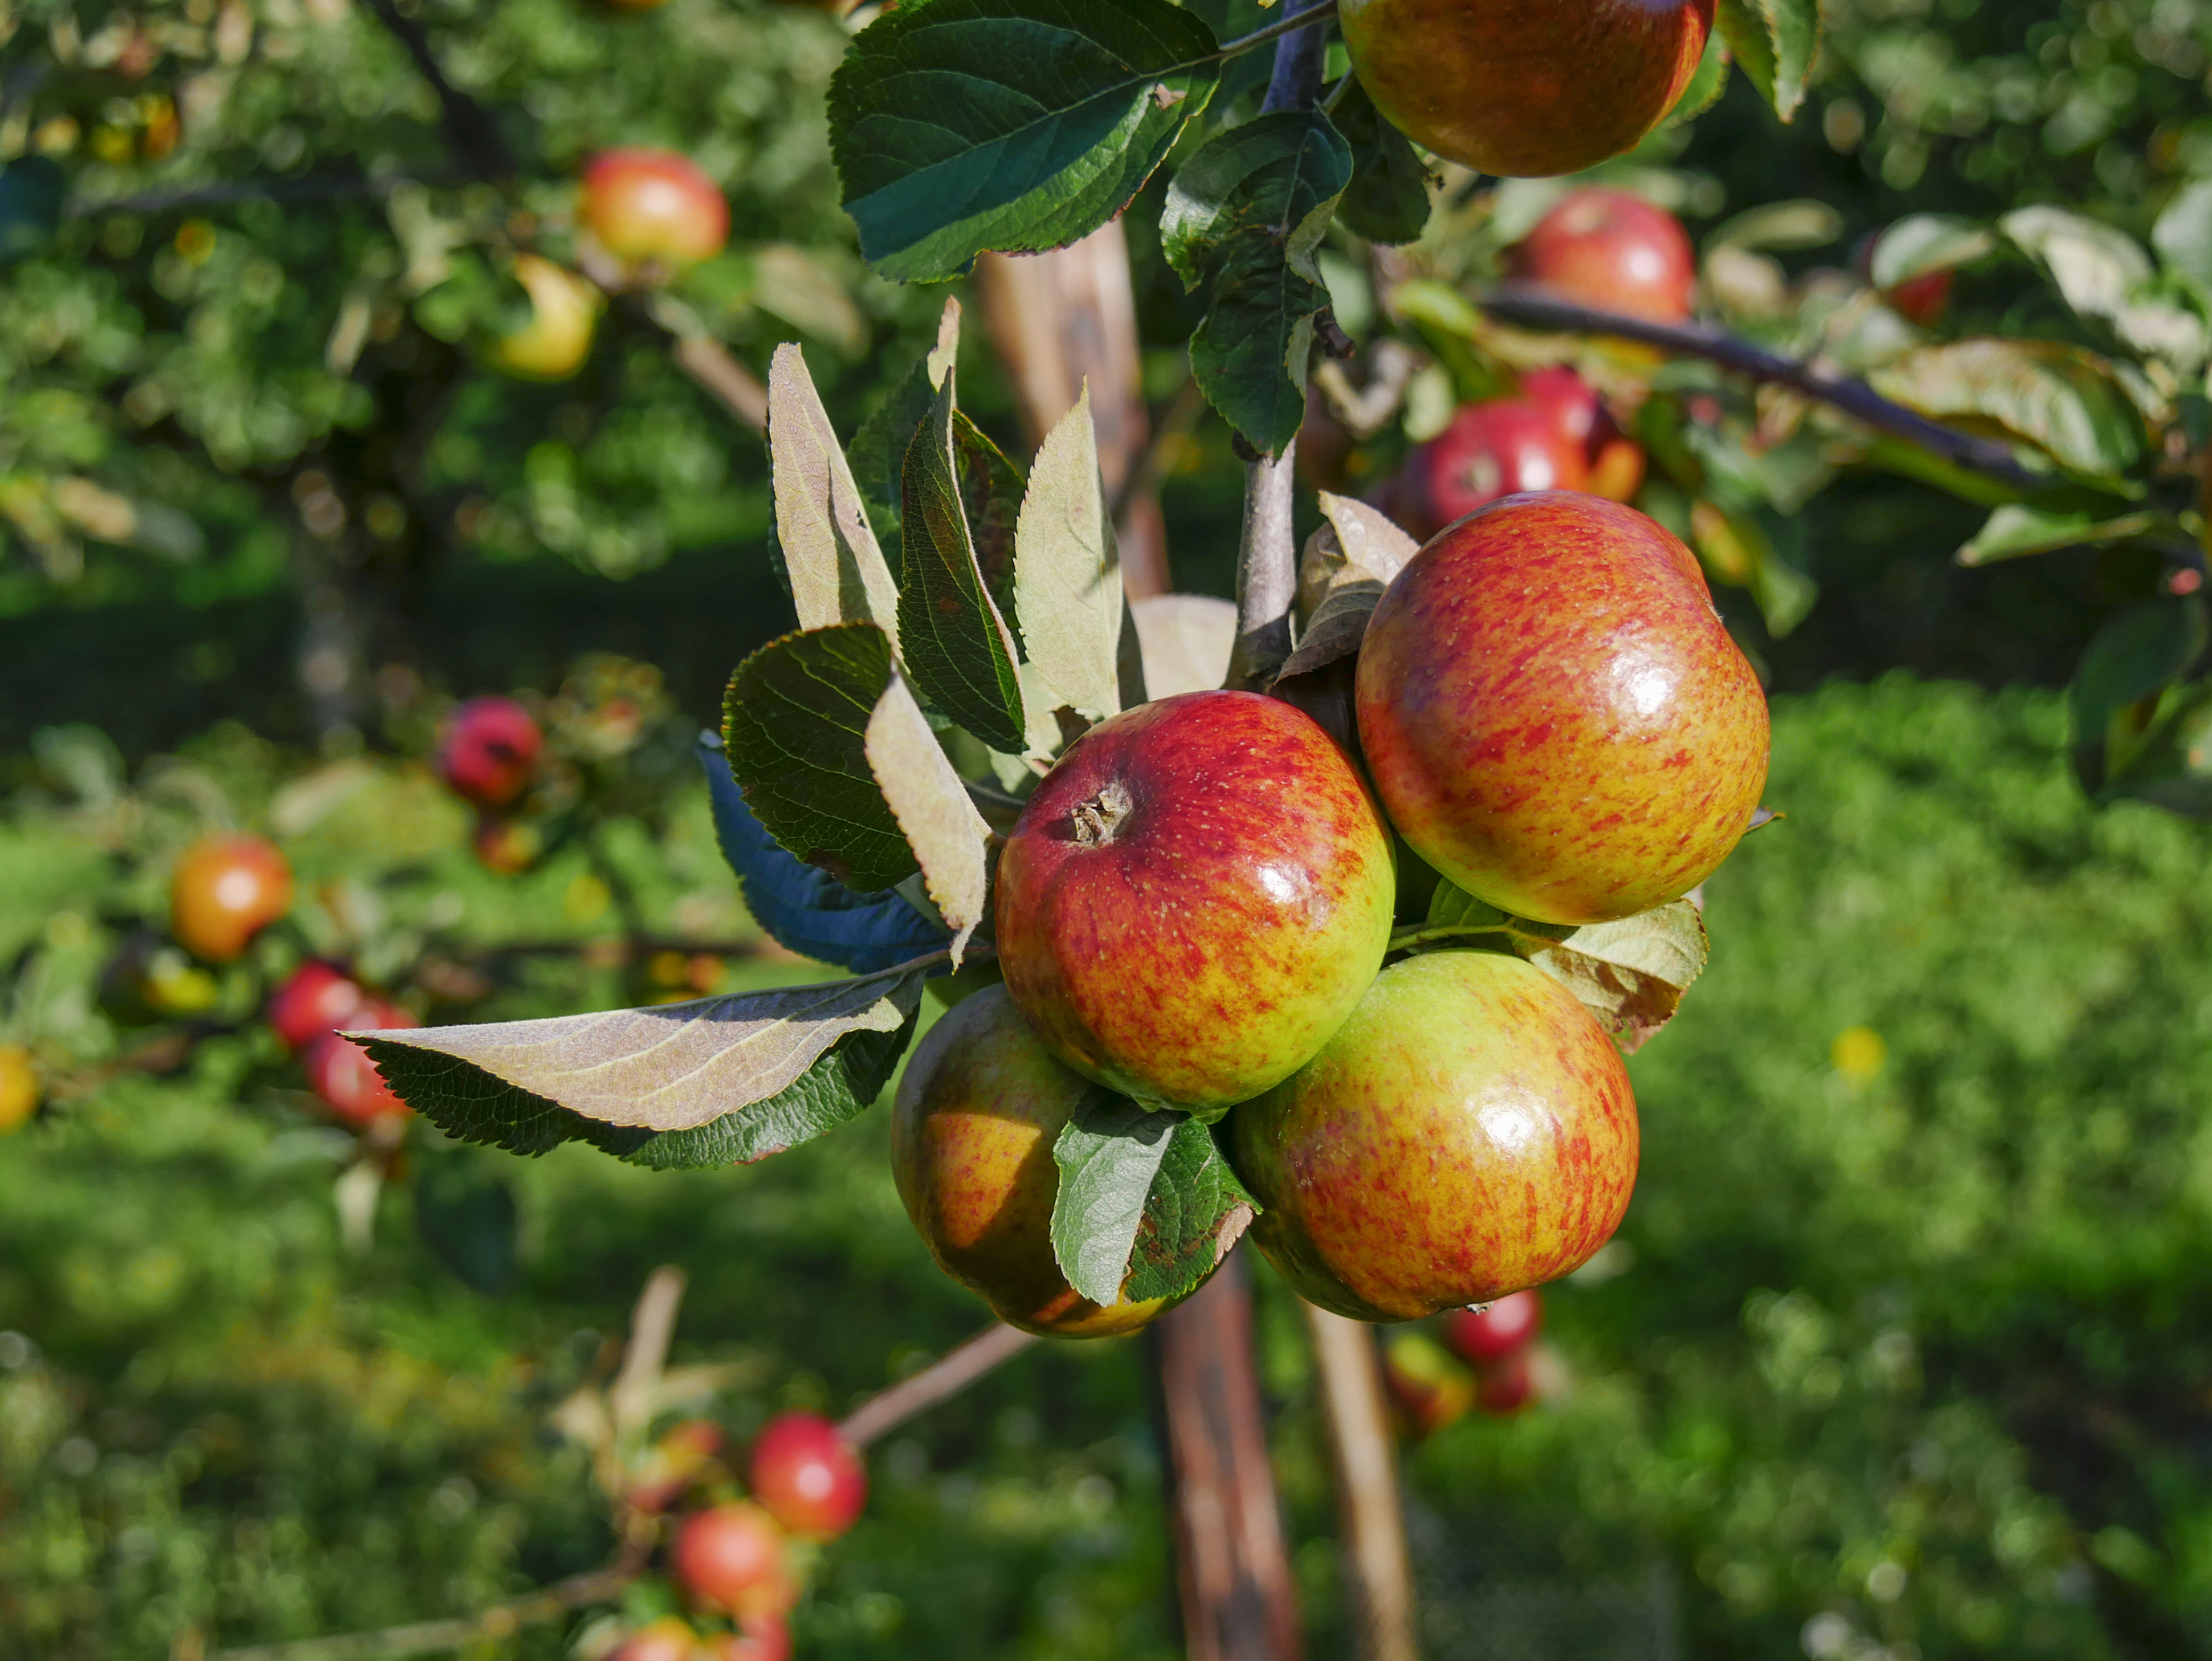 Orchard apples at Ardress House (Colin Beacom/National Trust Images/PA)